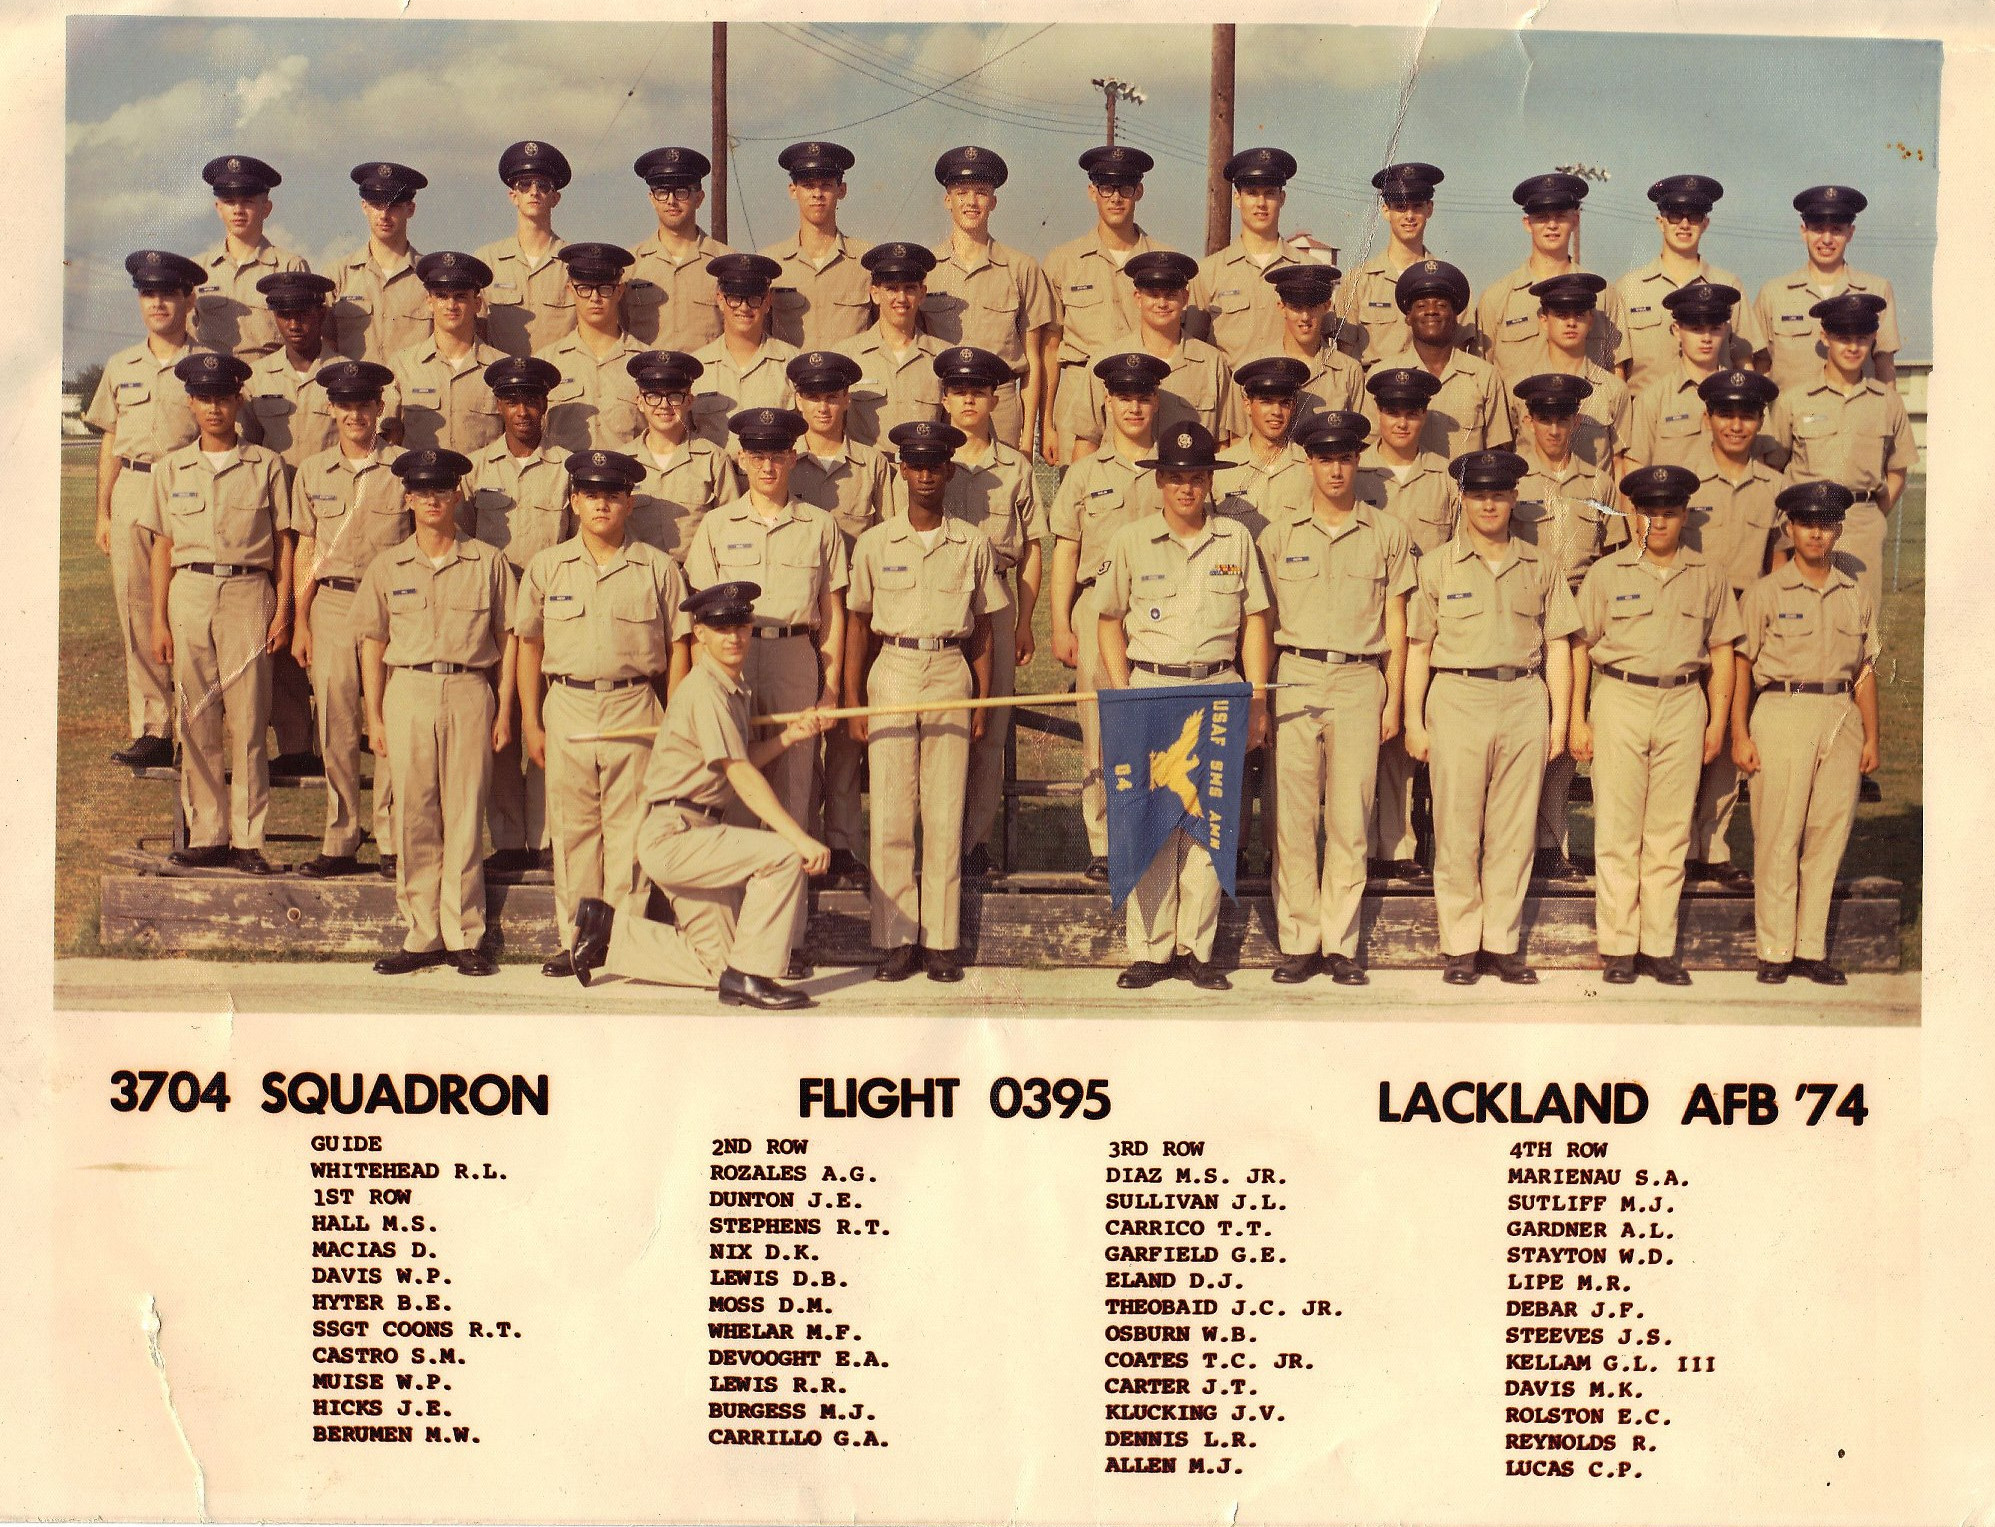 student assignments lackland afb